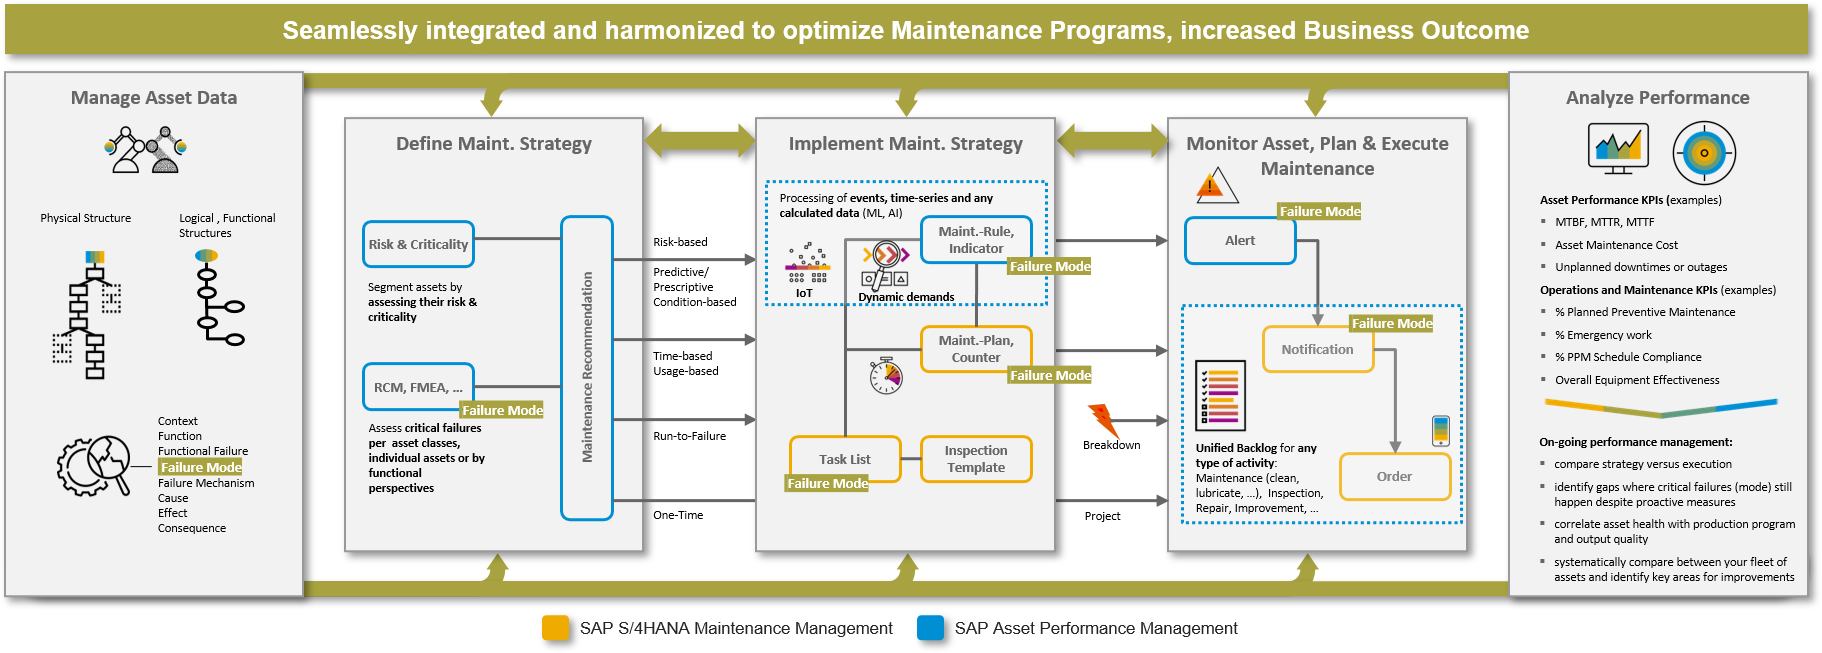 The collaboration between ASPM and EAM in the updated SAP APM solution